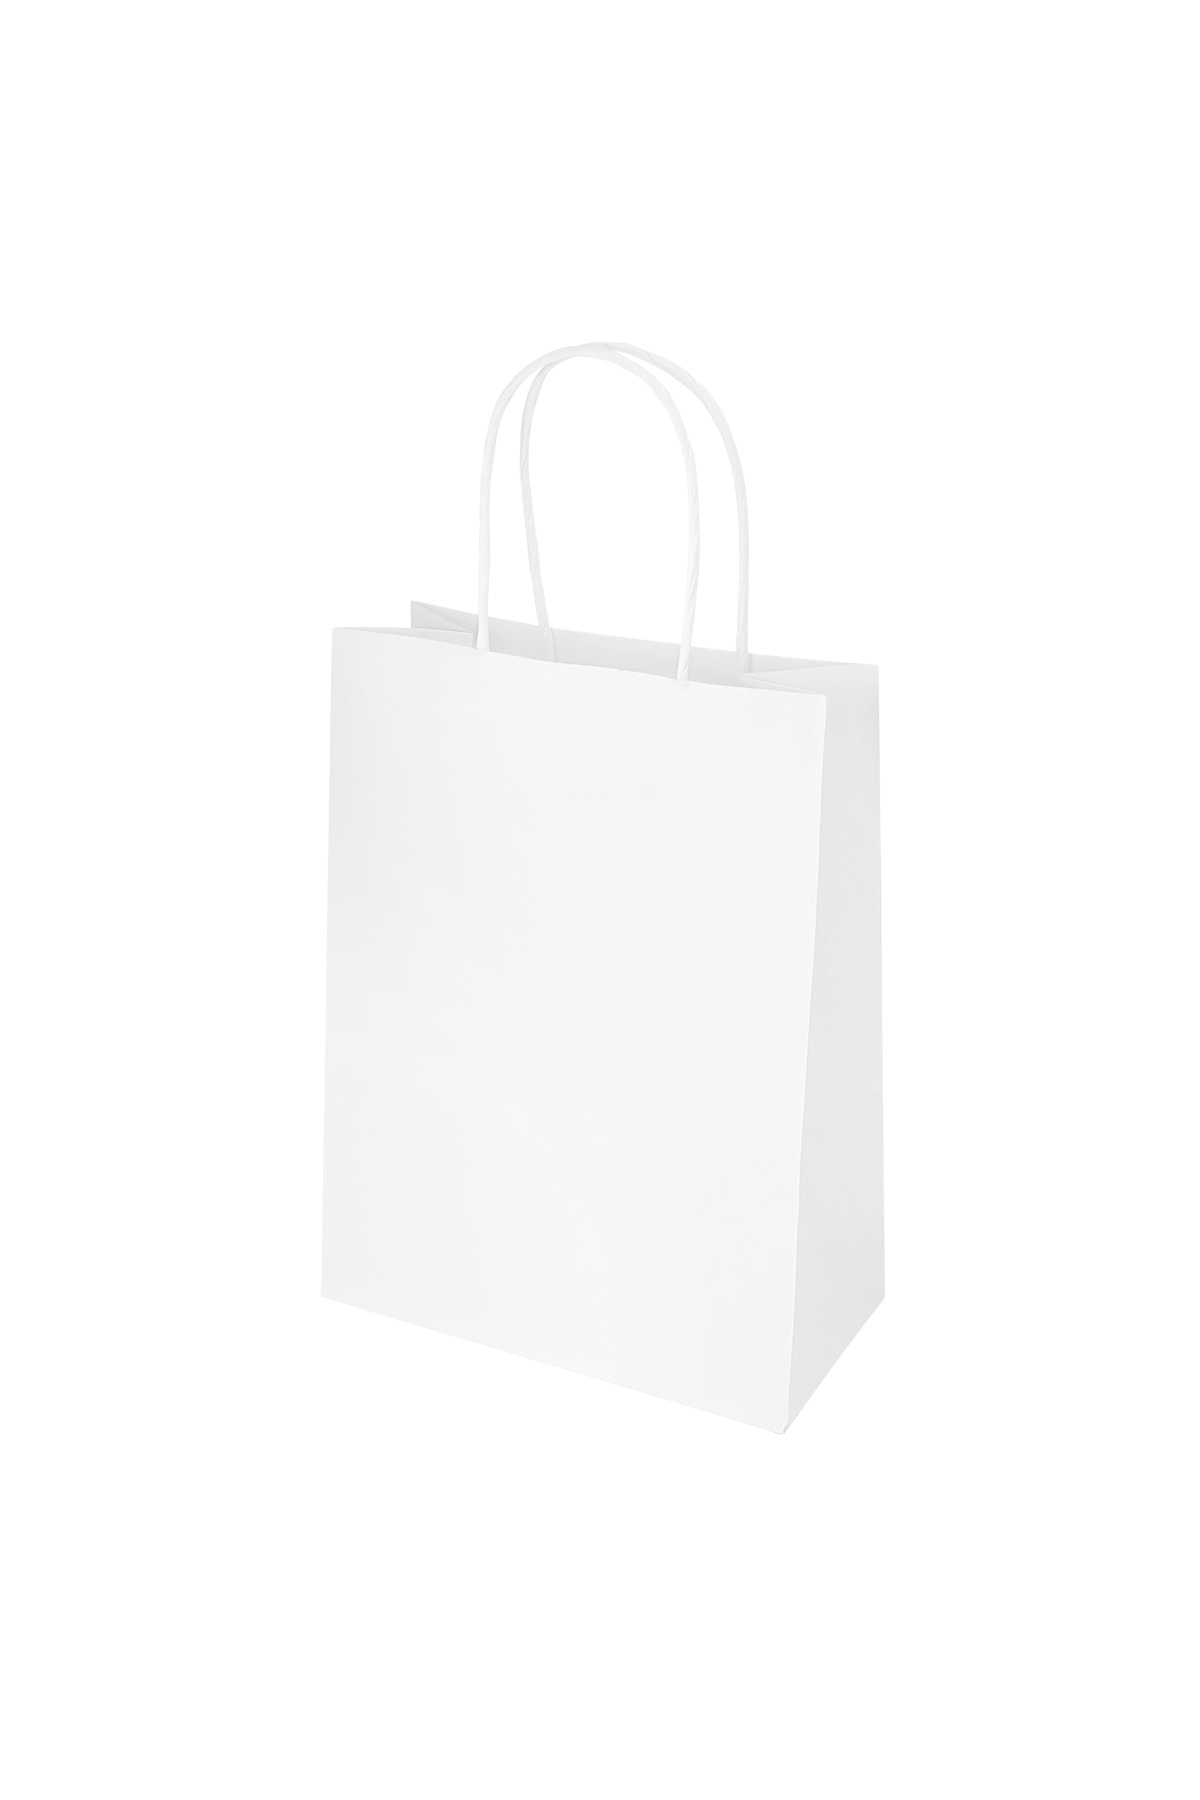 Bags plain 50 pieces small - white Paper